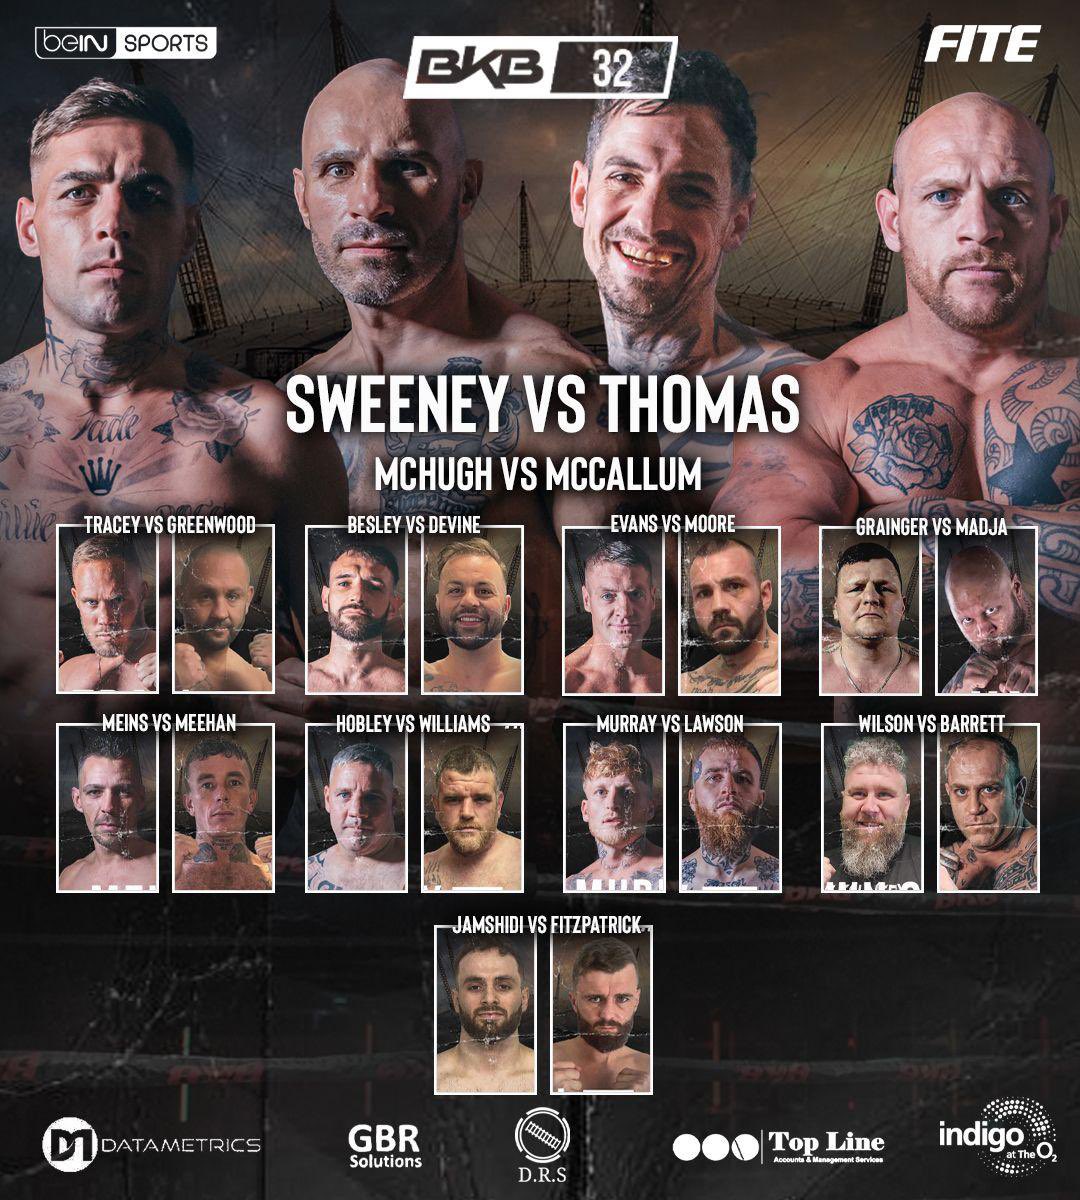 👊𝐅𝐈𝐆𝐇𝐓 𝐃𝐀𝐘 𝐈𝐒 𝐇𝐄𝐑𝐄👊

Watch all the Bare Knuckle Boxing action starting at 11am ET on #FITEplus ($7.99/mo)

#BKB32 ➡️ bit.ly/BKB32FITEplus